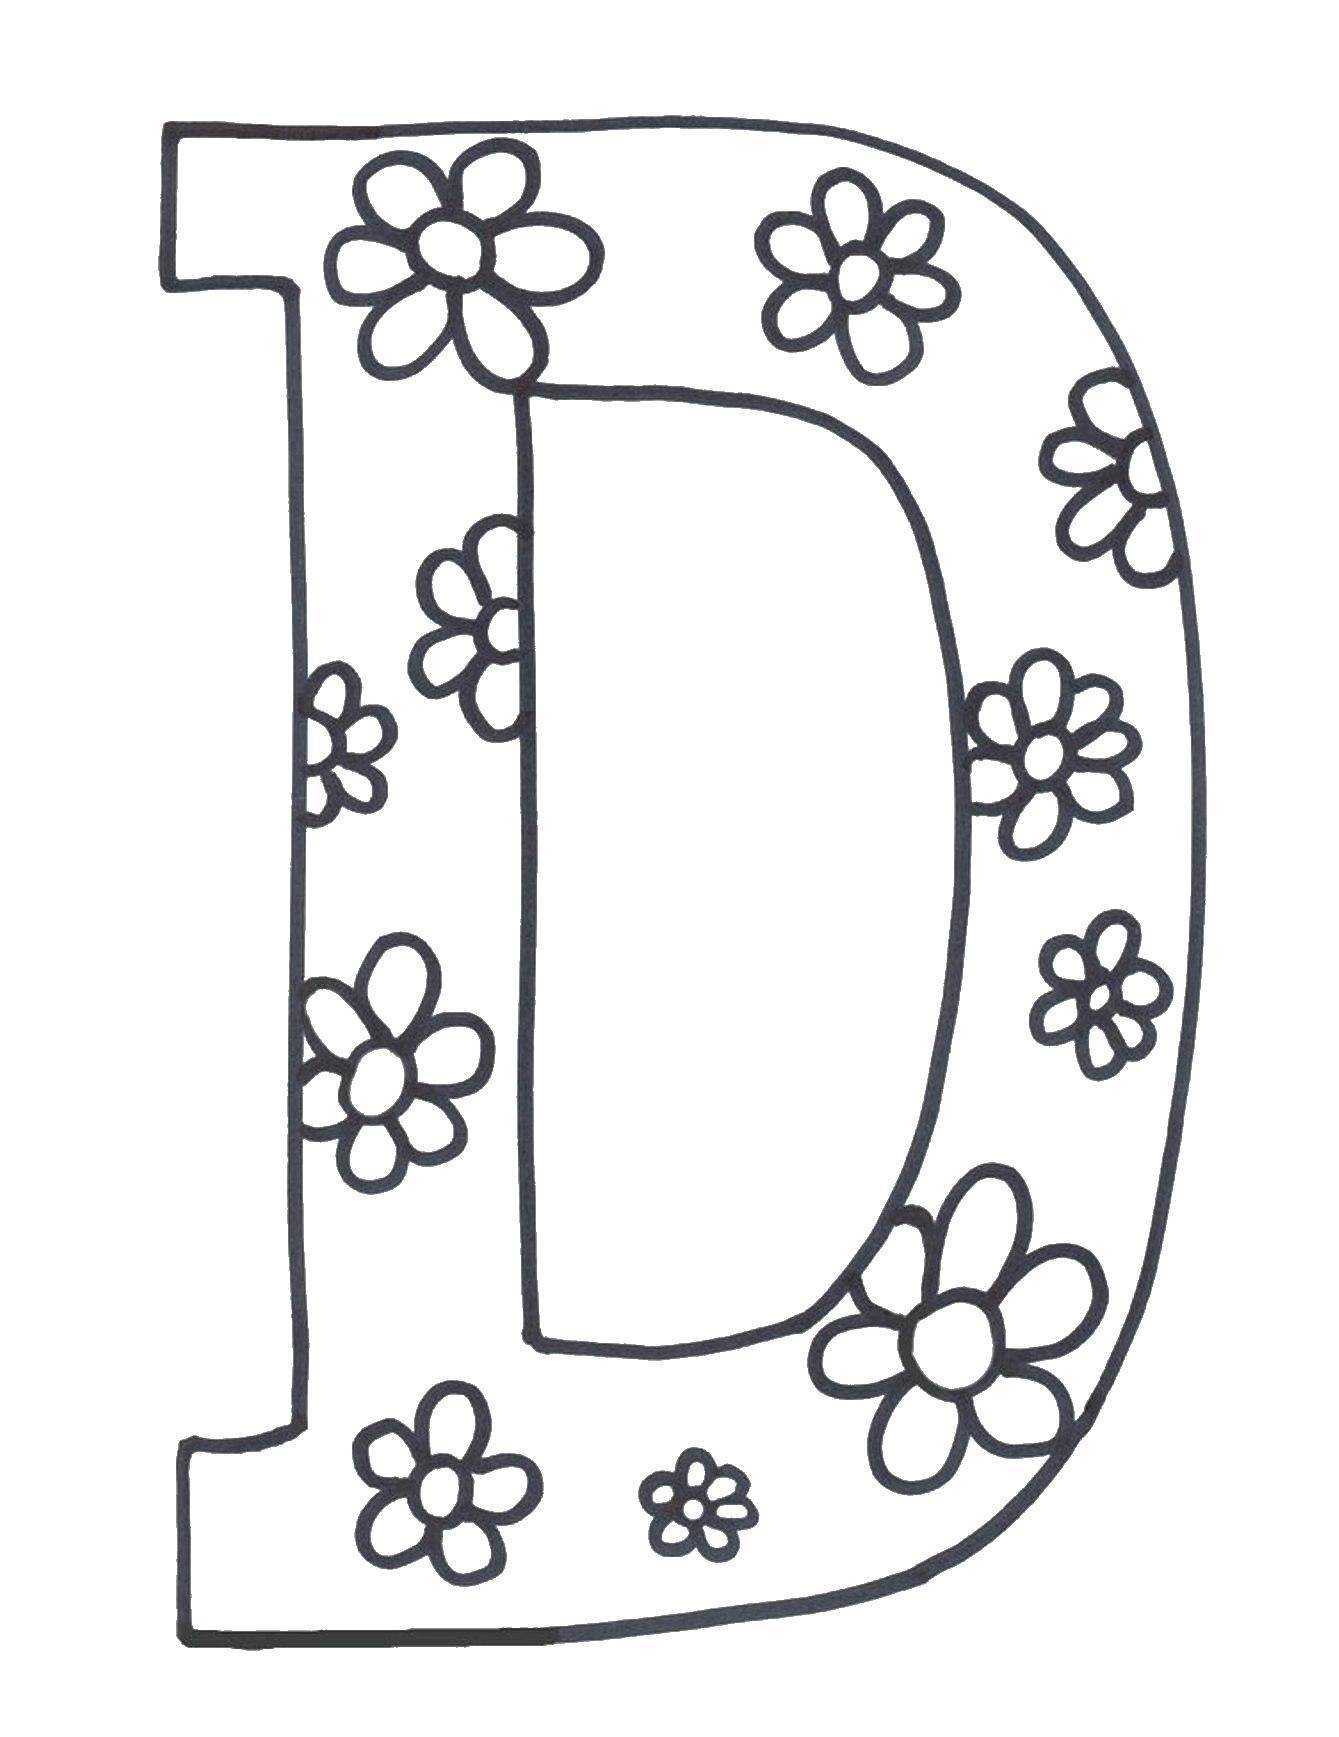 Coloring The letter d in colors. Category English alphabet. Tags:  The alphabet, letters, words.